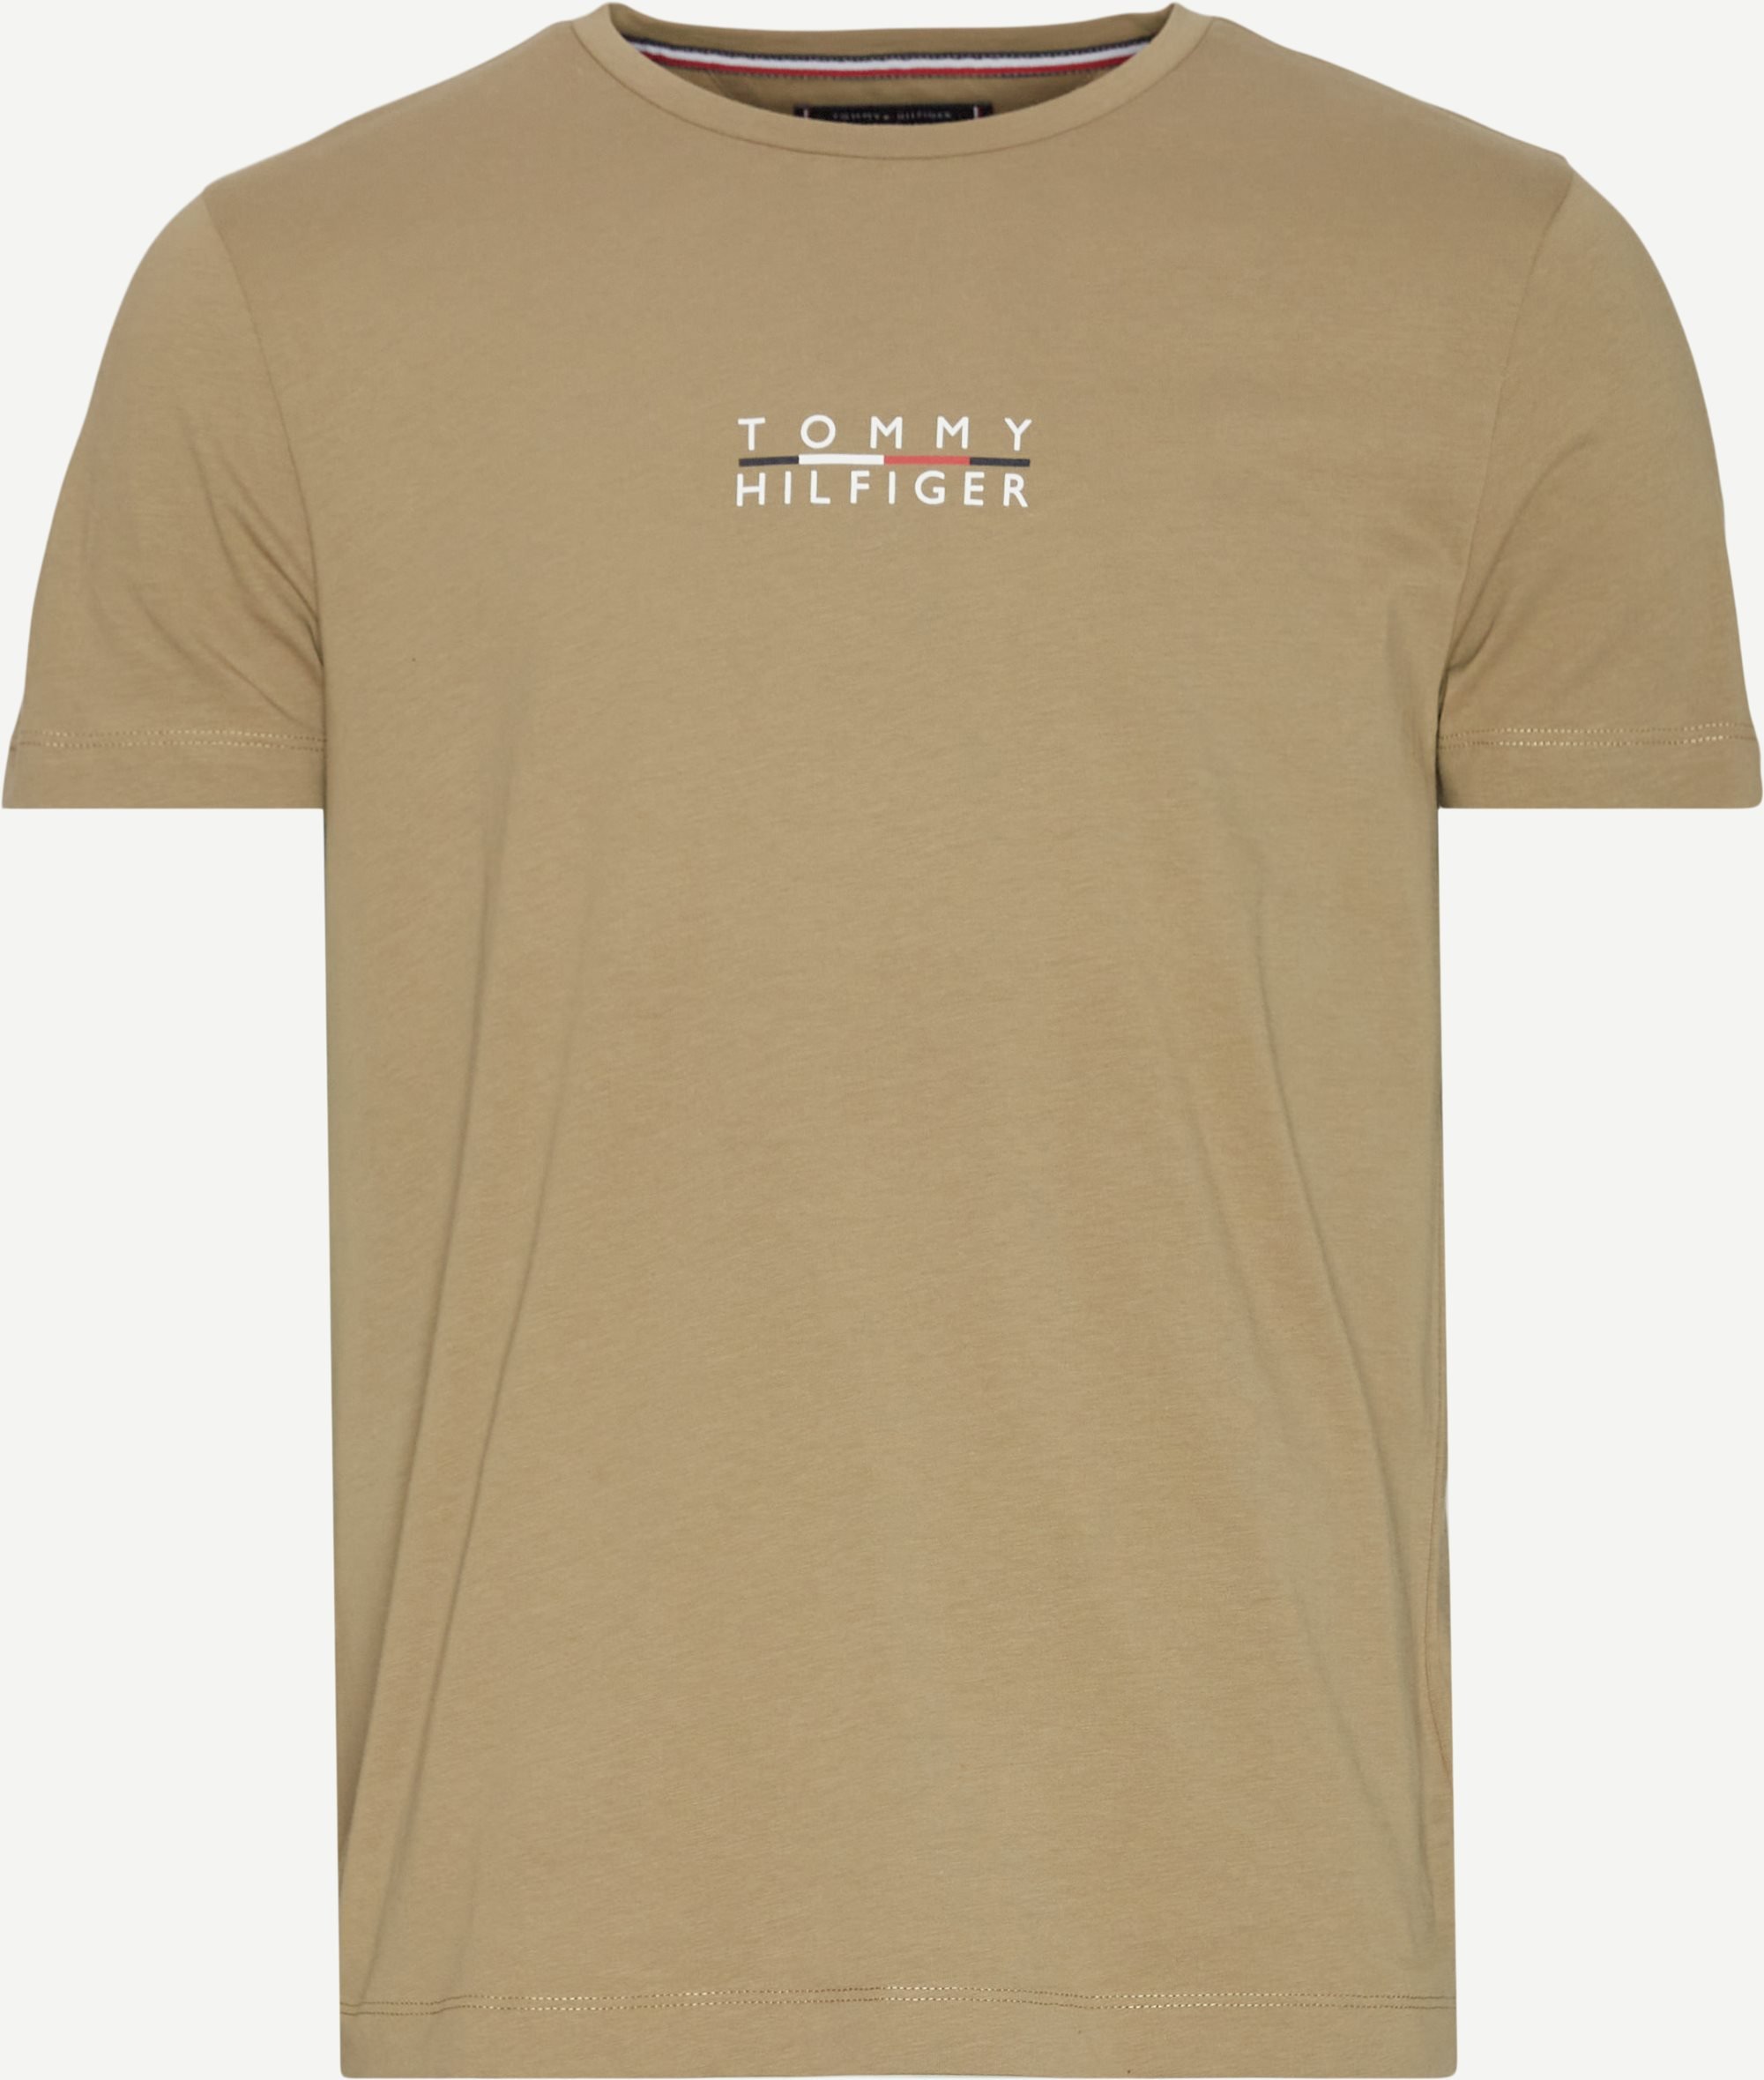 T-shirts - Regular fit - Army